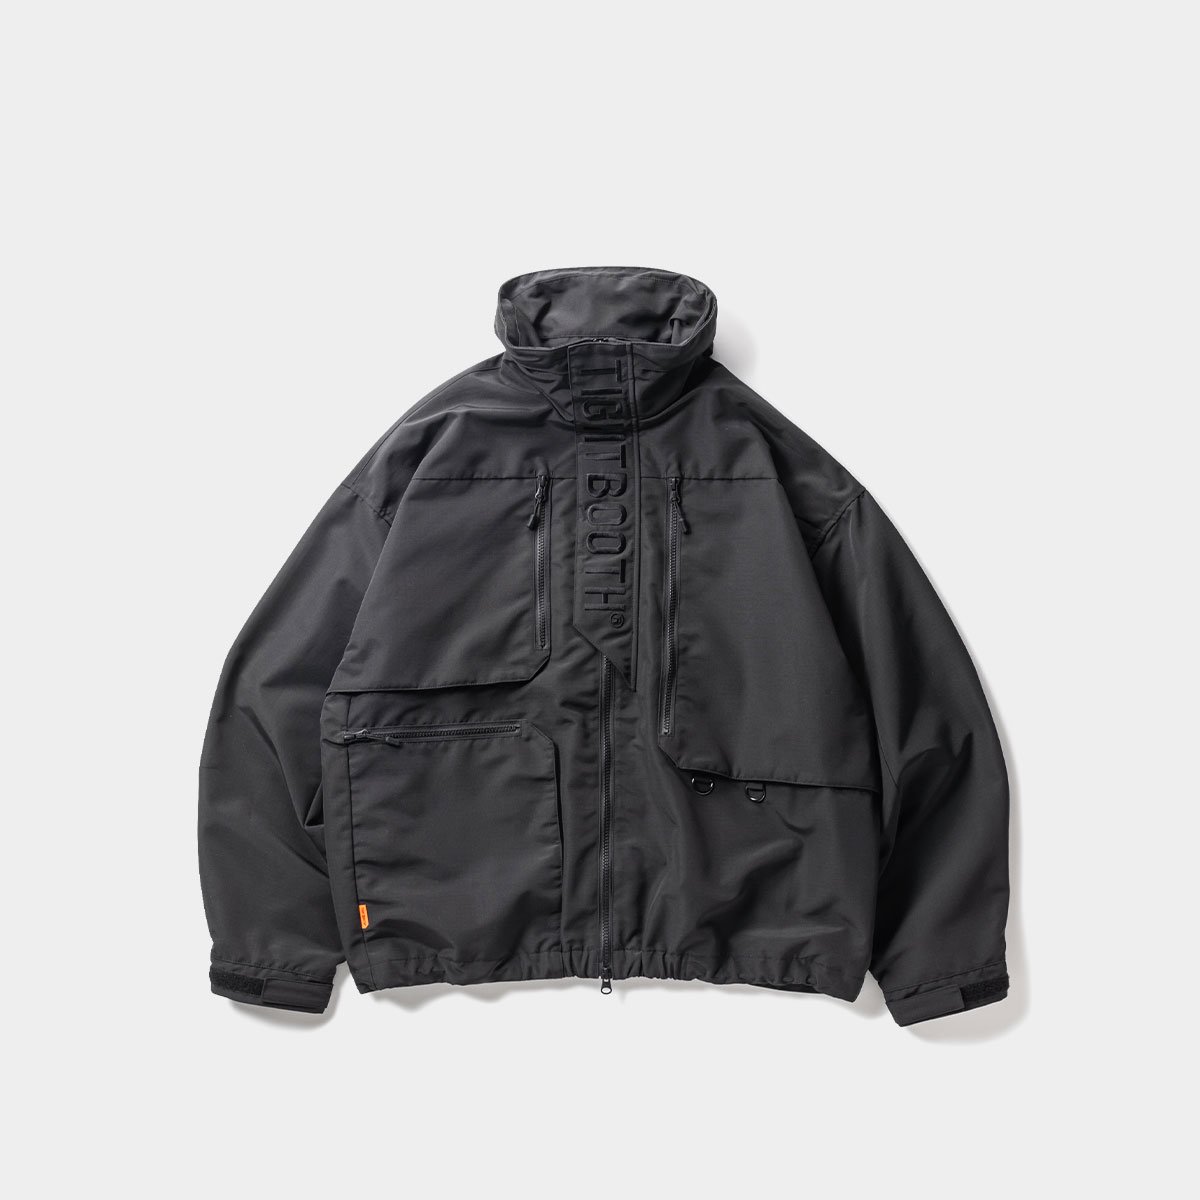 TIGHTBOOTH - RIPSTOP TACTICAL JKT - SHRED